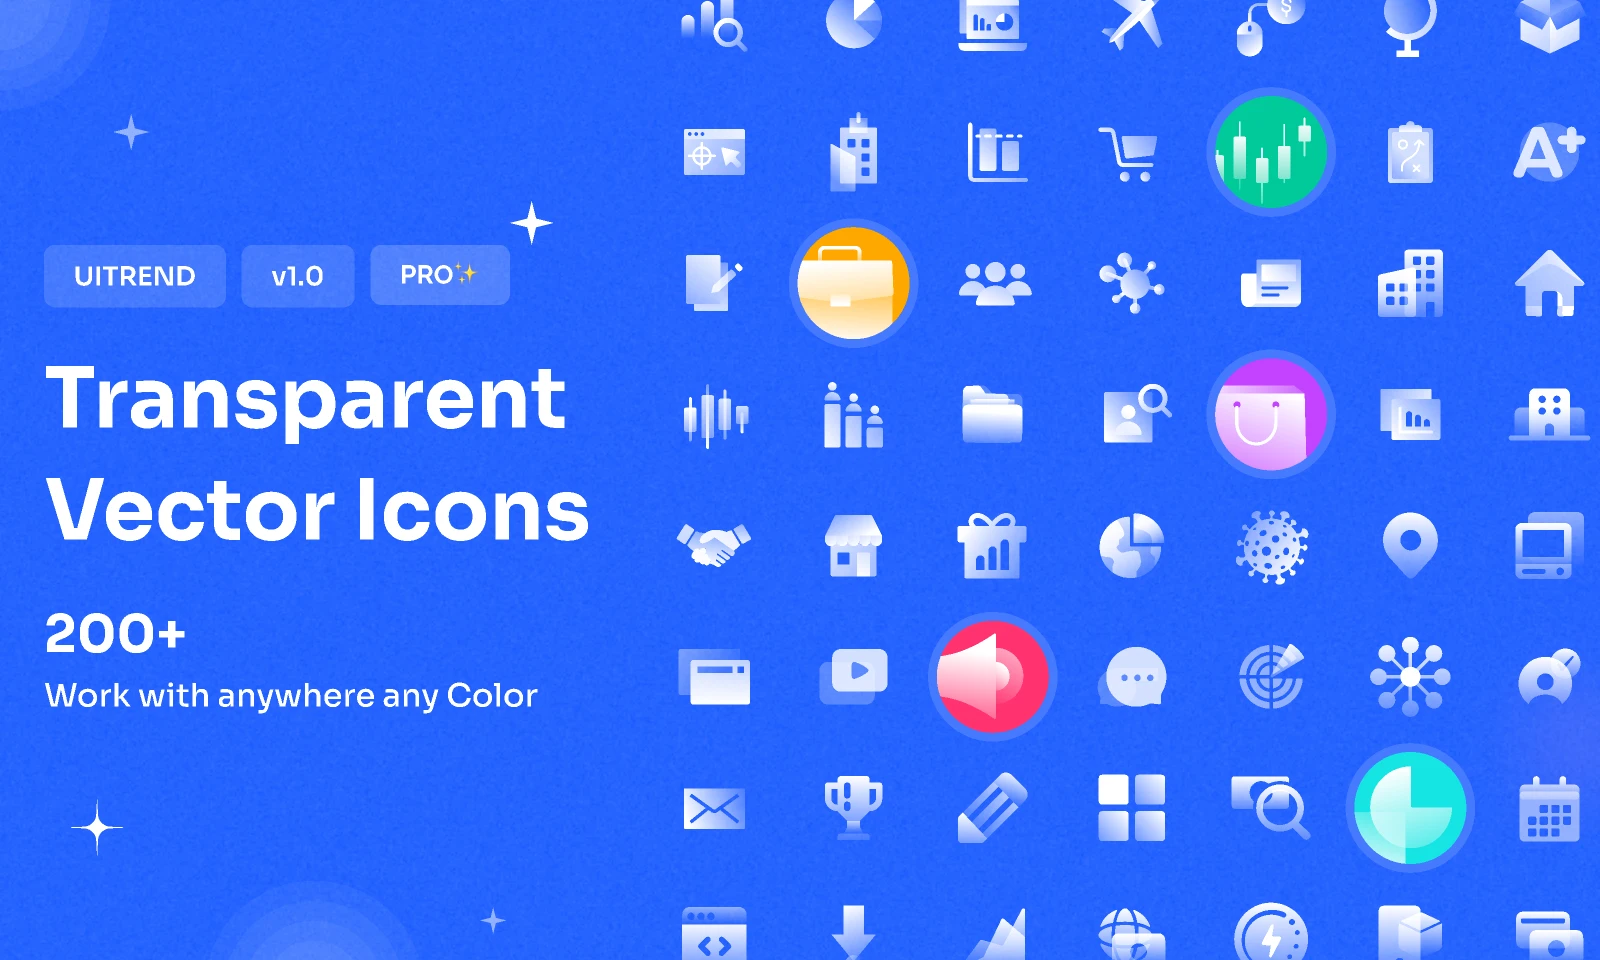 Transparent Vector Icons Pack 200+ for Figma and Adobe XD